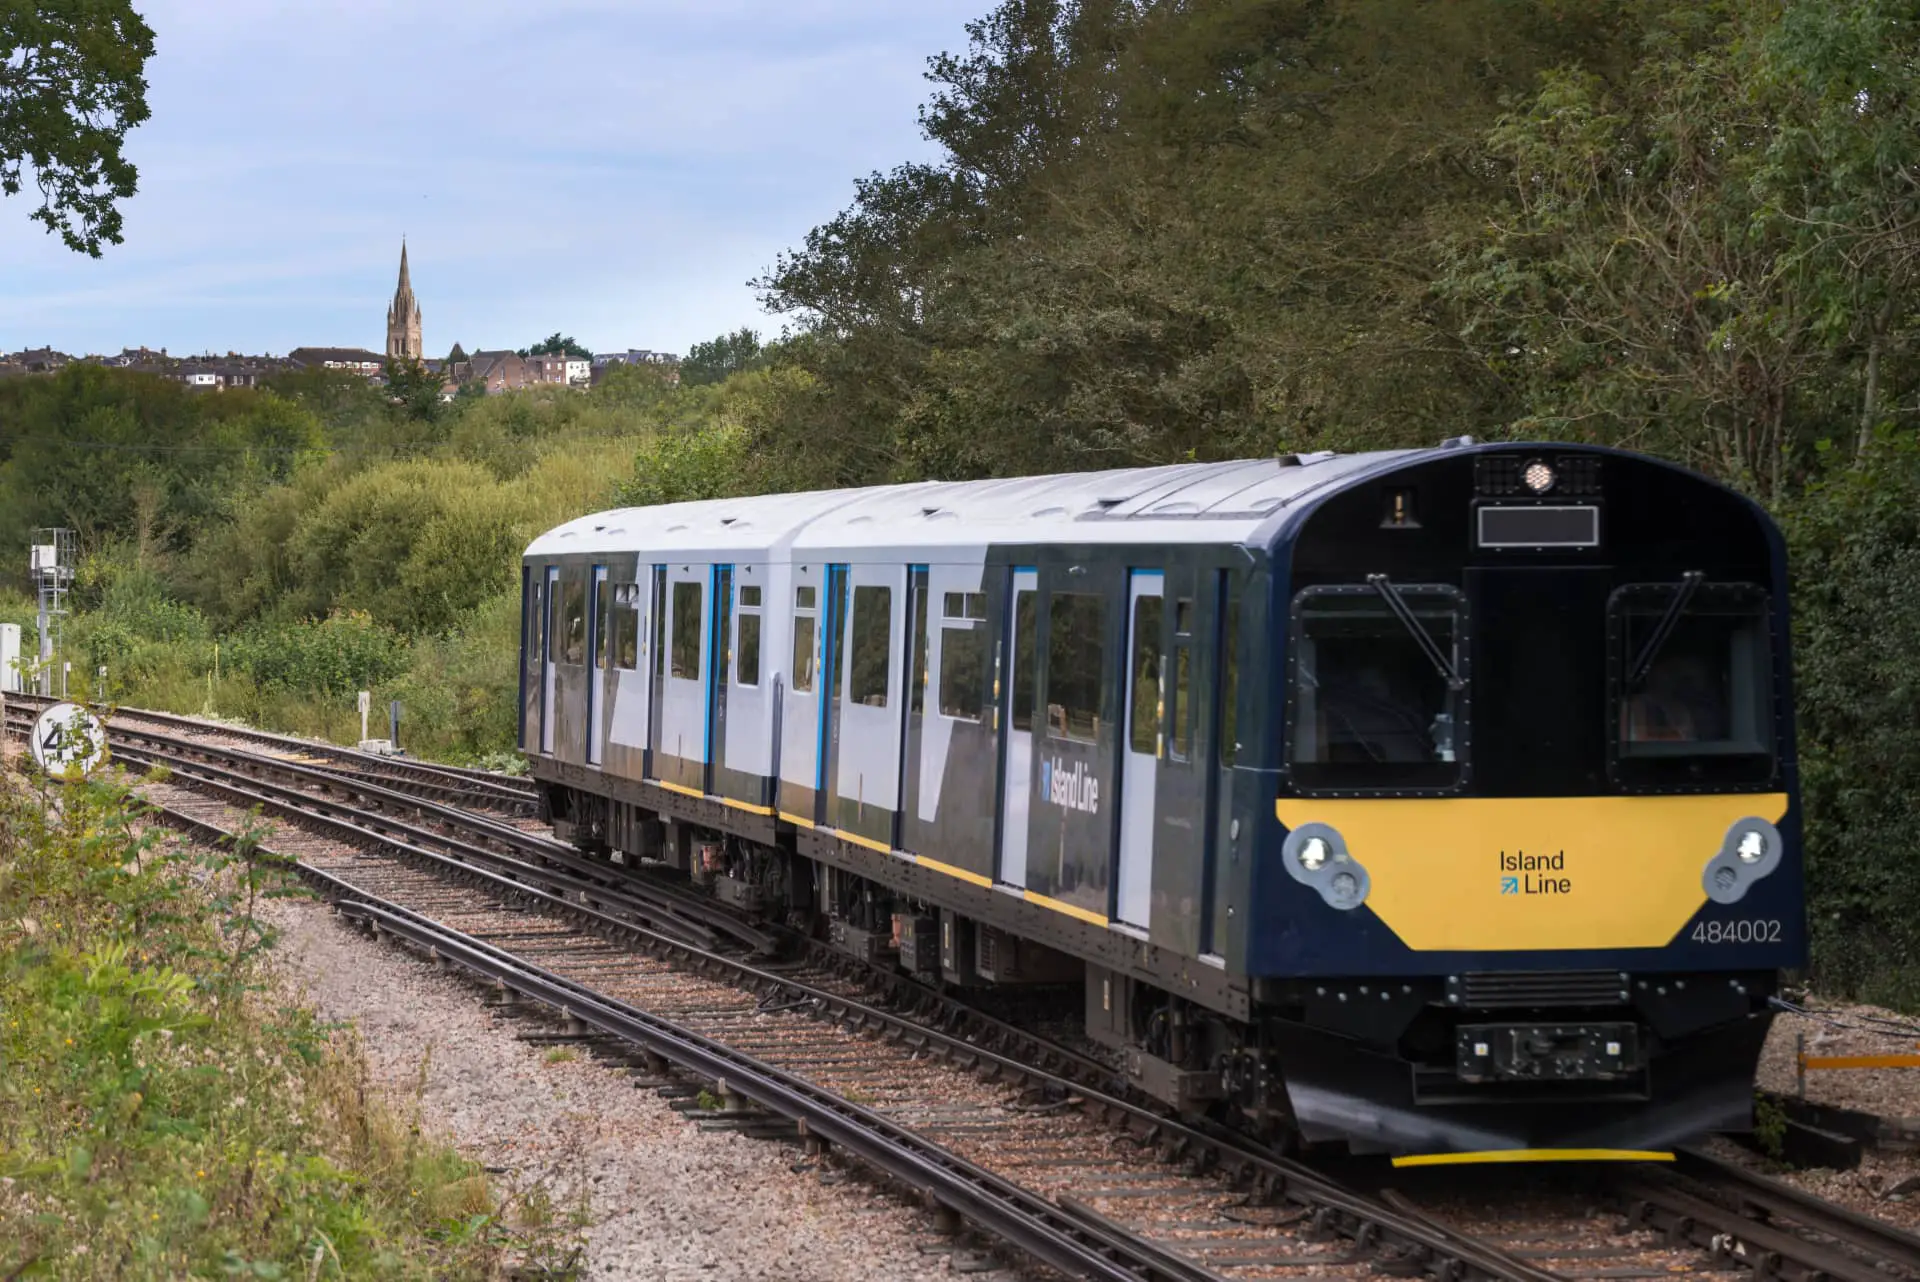 Island Line Class 484 on tracks with All Saints Church Ryde spire in background